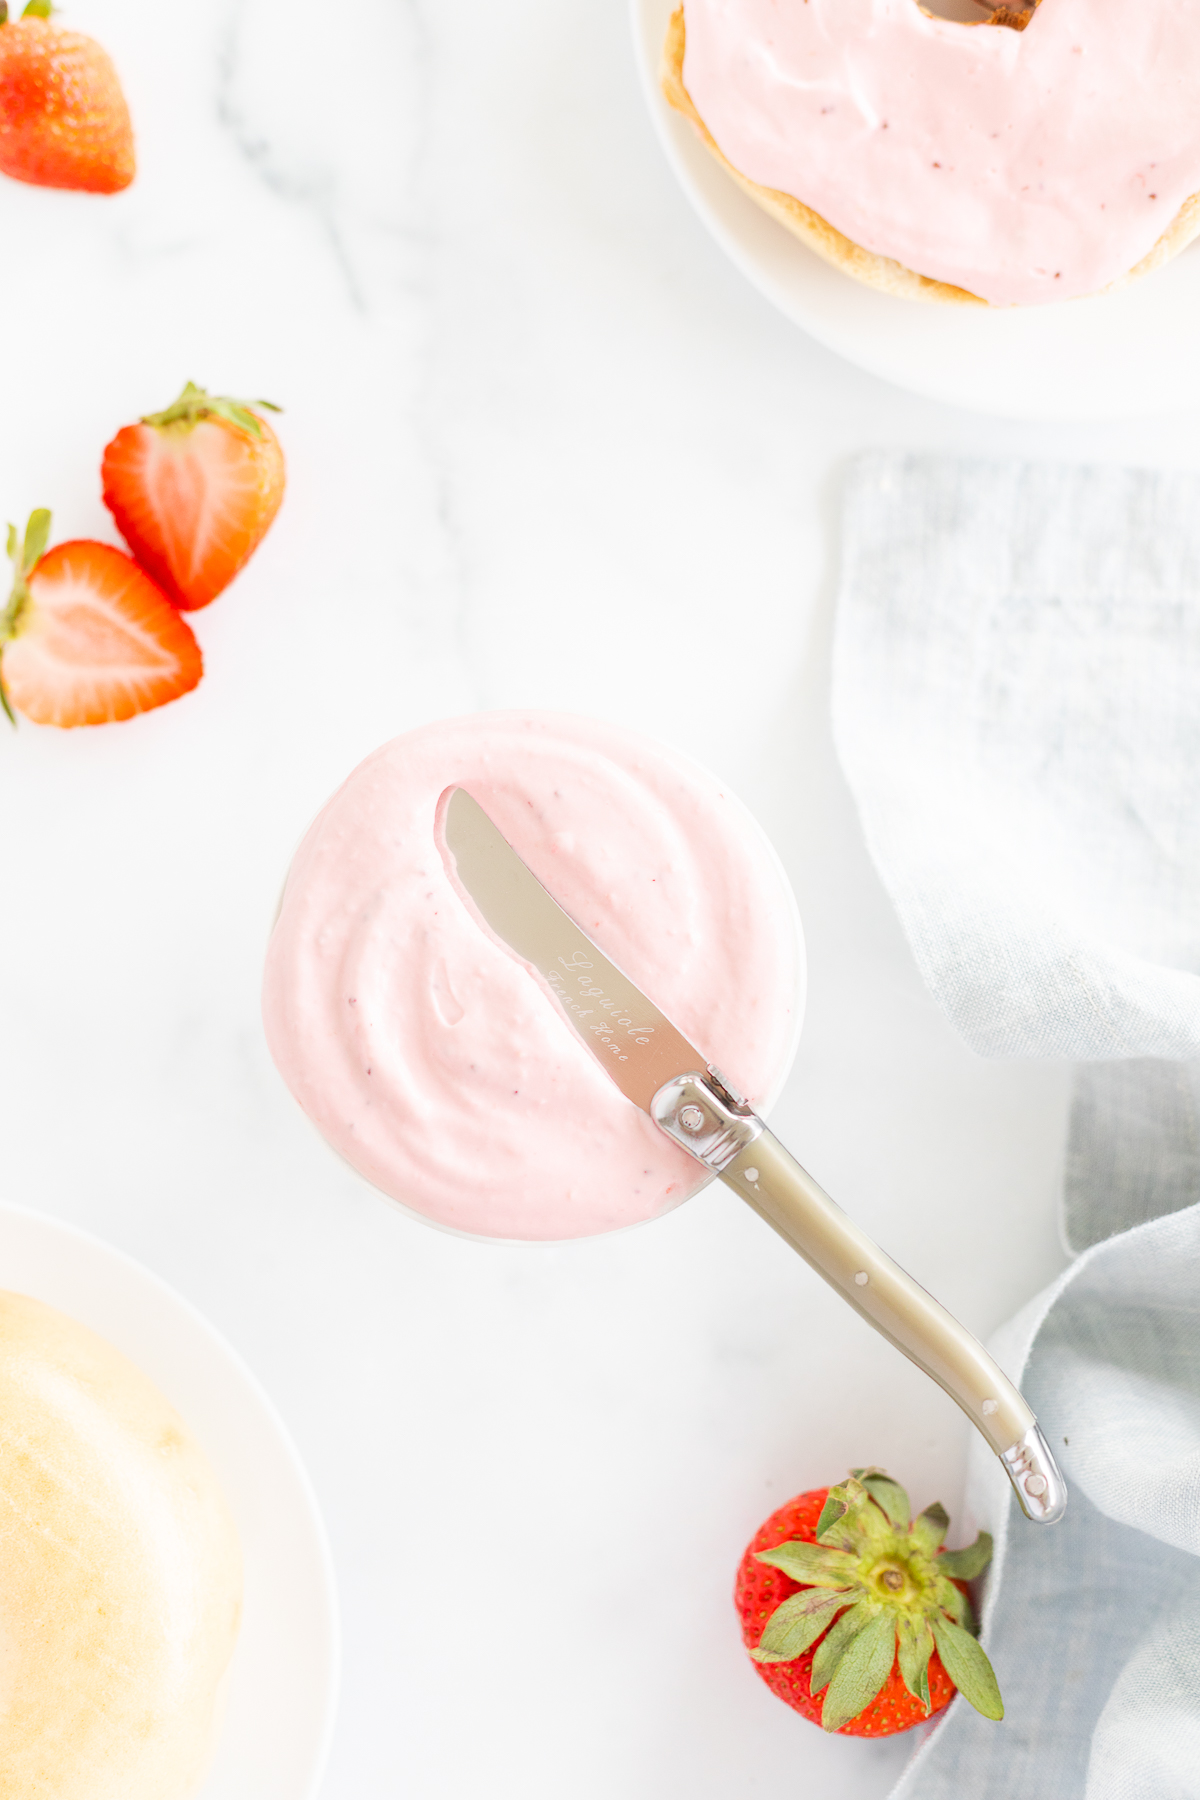 A knife on top of a bowl of strawberry cream cheese.